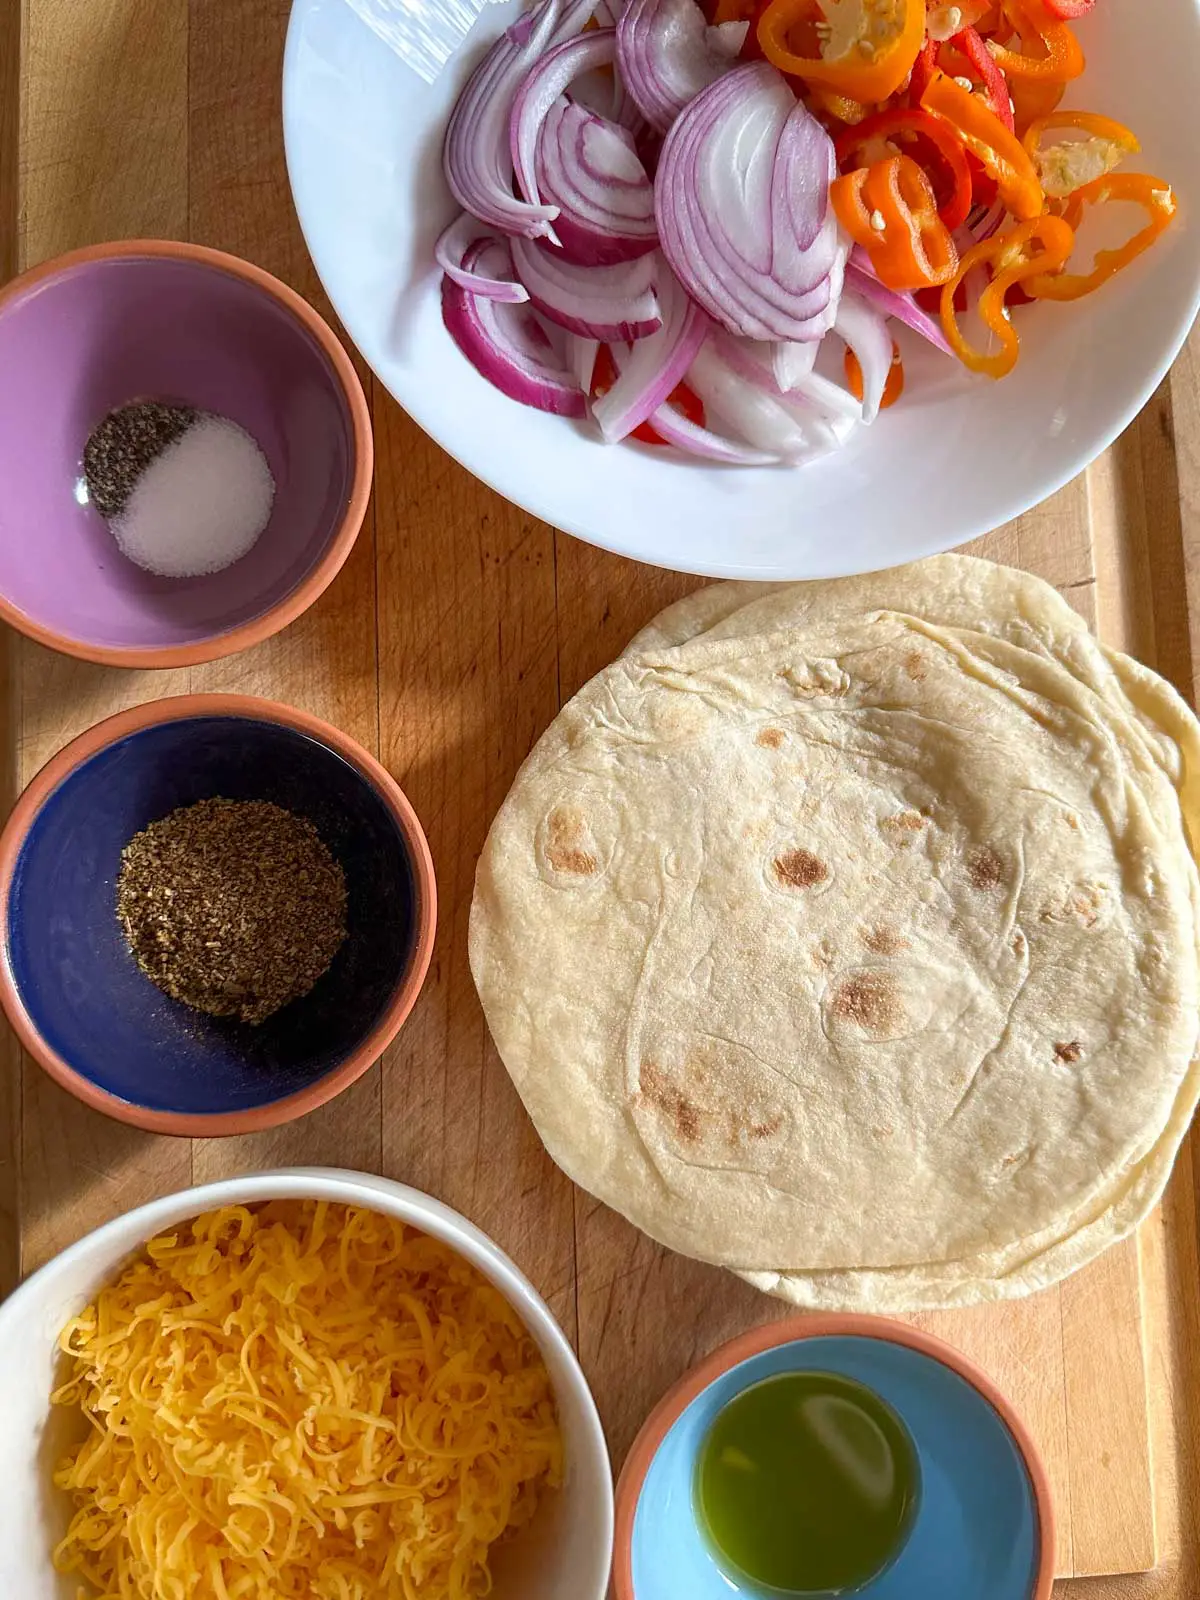 A white bowl containing sliced mini sweet peppers and sliced red onion, tortillas, and bowls containing shredded cheese, salt and pepper, fajita seasoning, and olive oil.